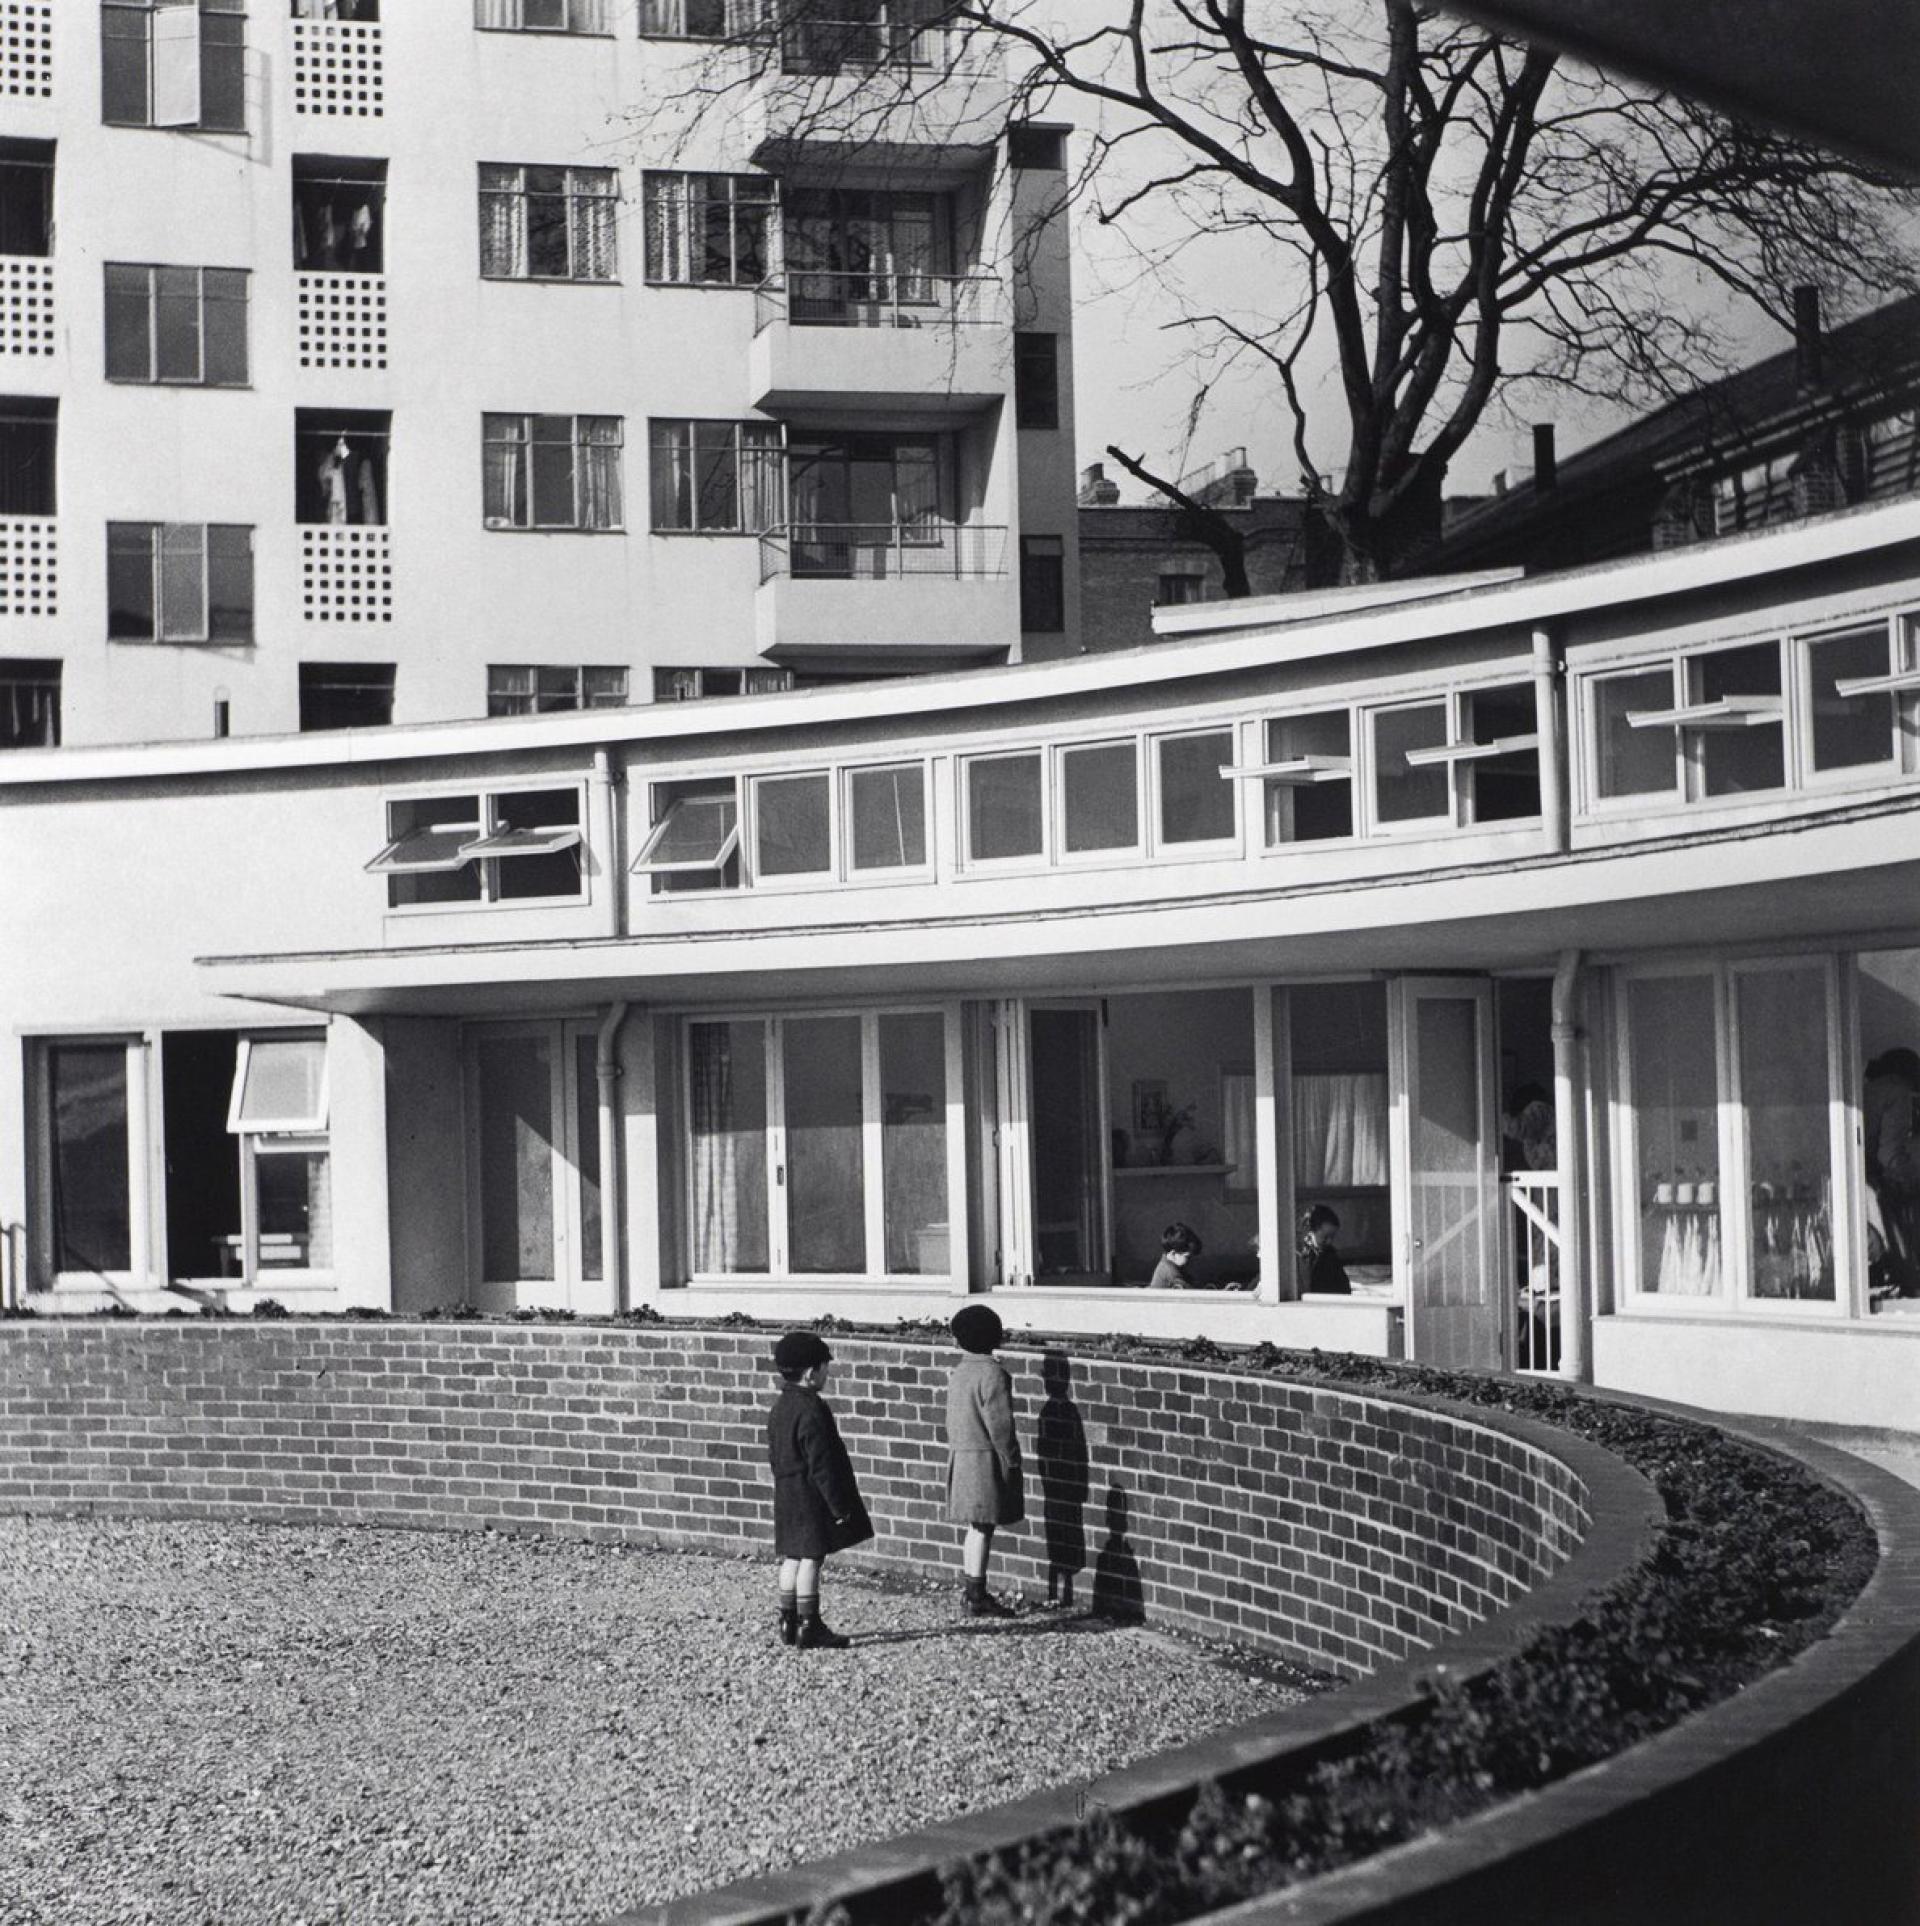 Fry and Denby used Kensal House to put into practice Modernist ideas for social change starting at home, offering carefully-planned flats with generous kitchens, bikes storages, gardens, large balconies and nursery. | Photo by Edith Tudor Hart at RIBA Collections